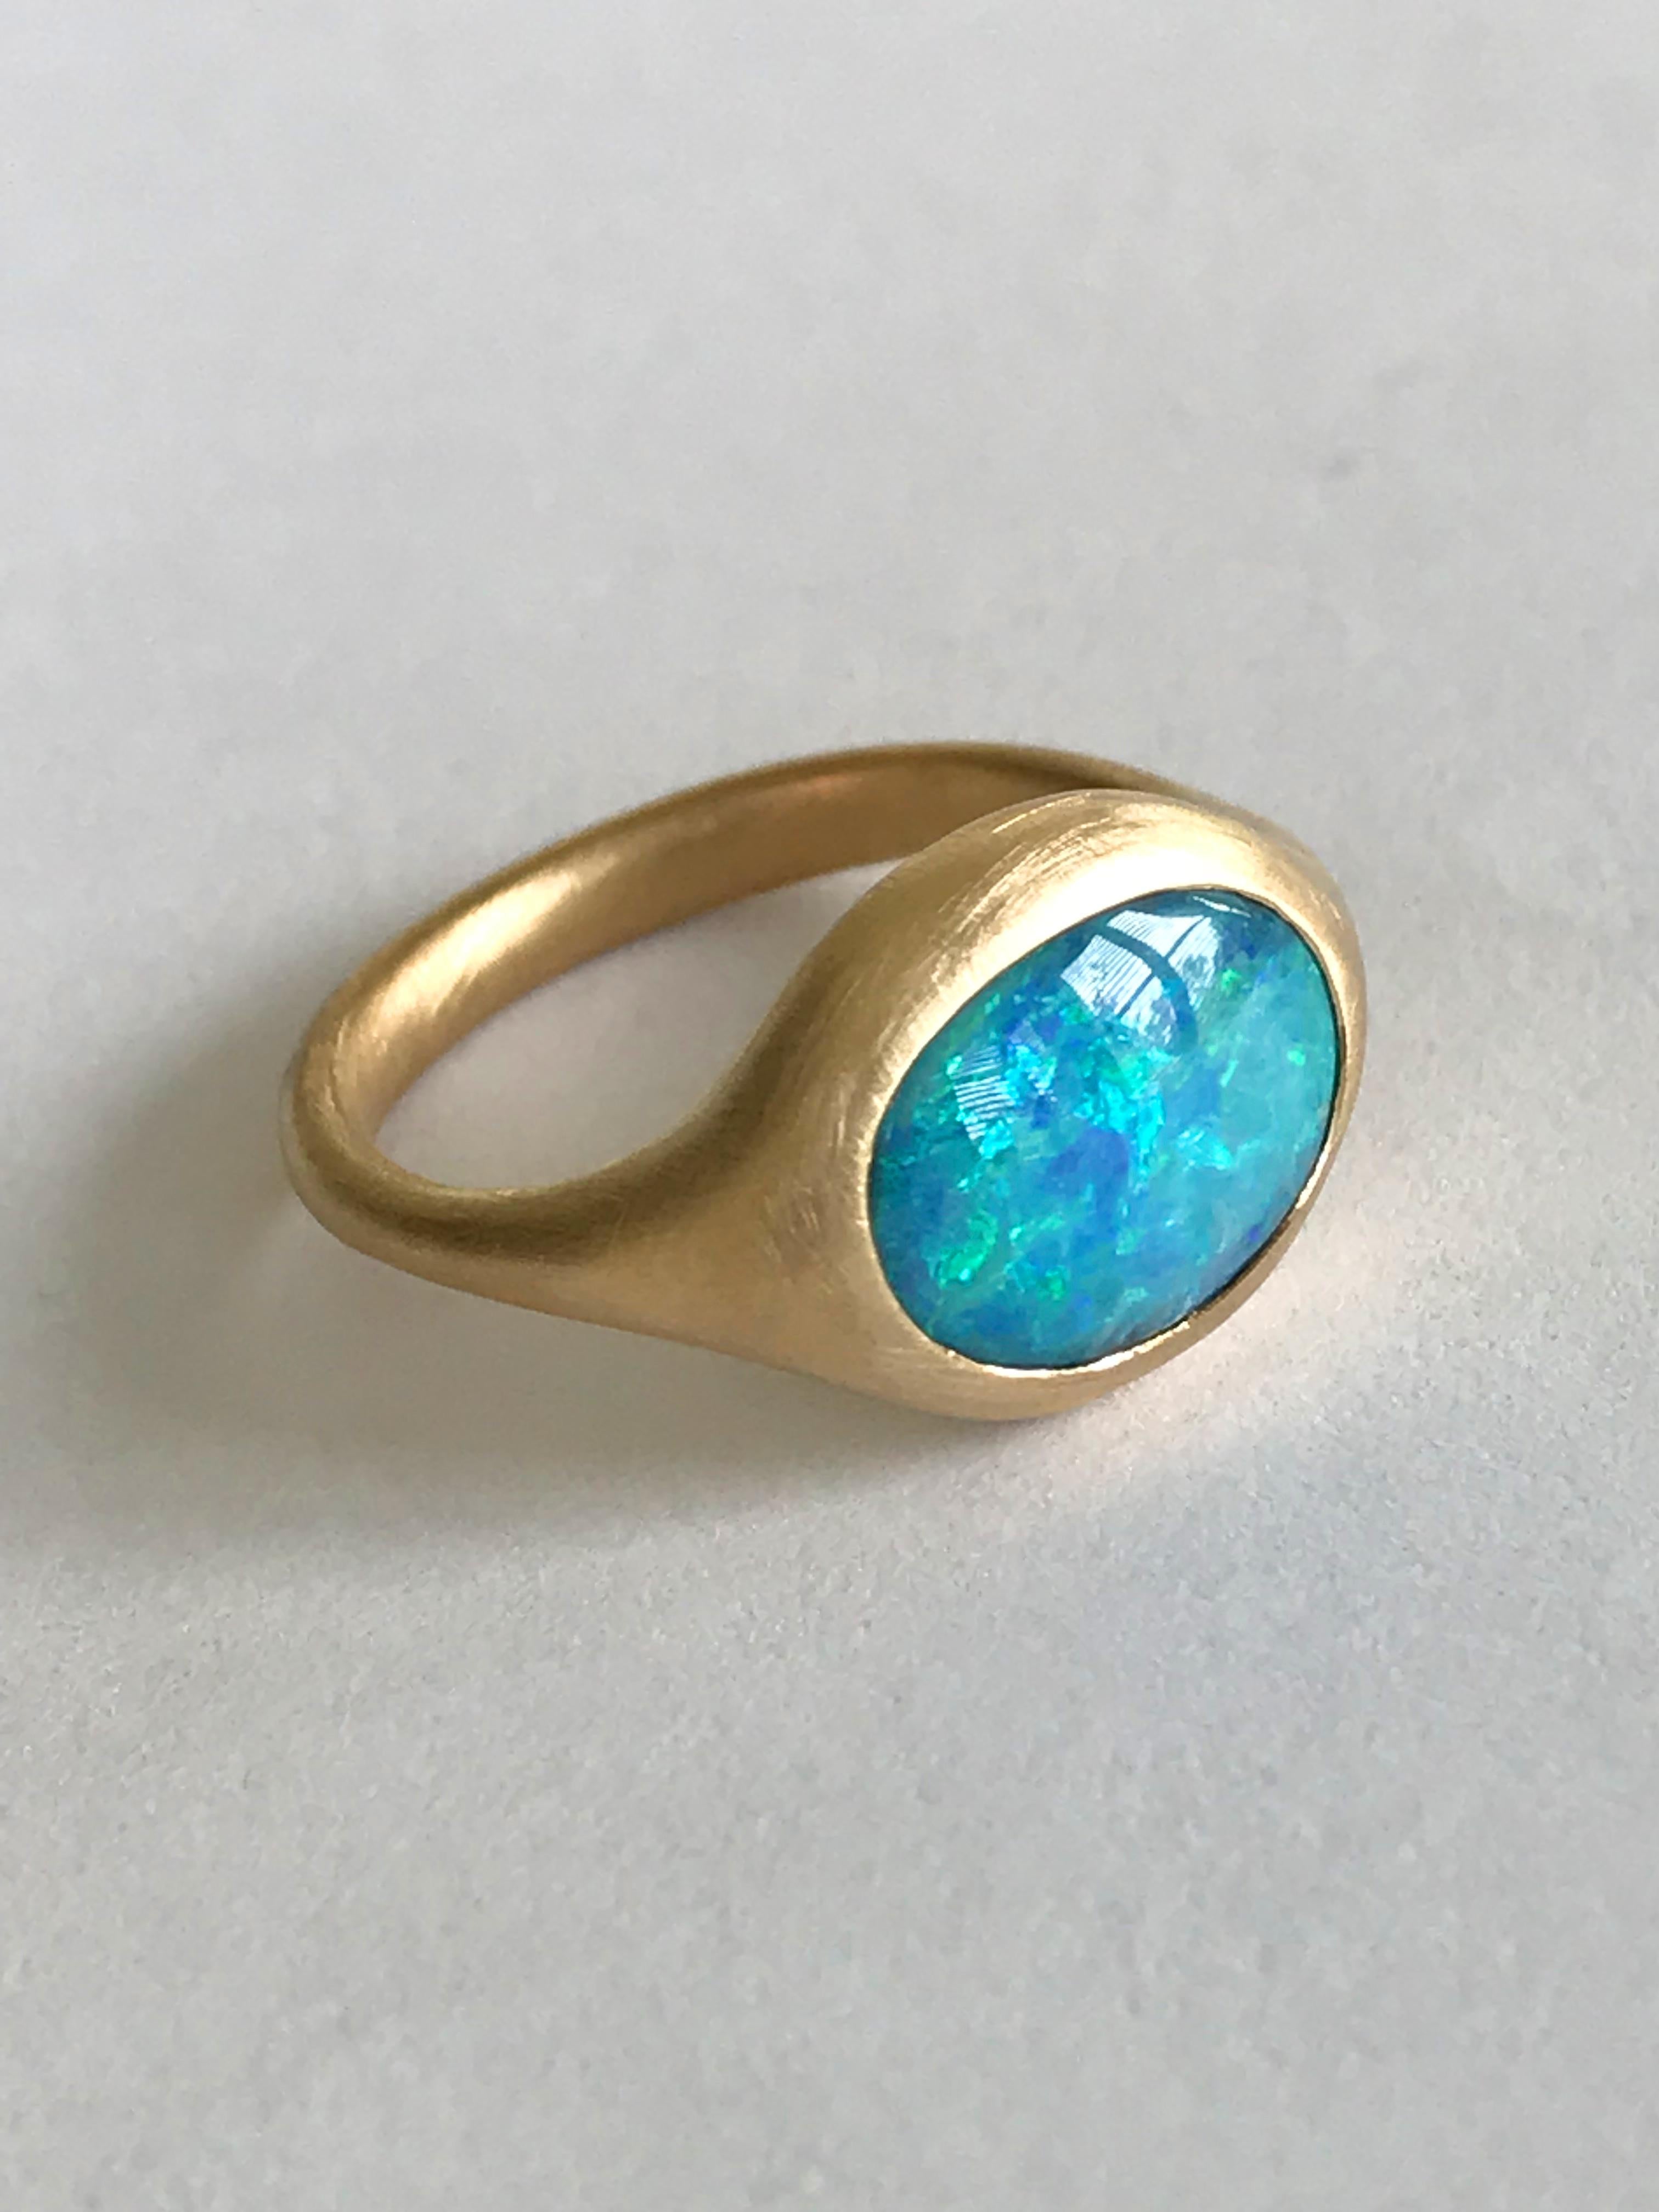 Dalben design One of a kind 18 kt yellow gold ring with a 3,24 carat bezel-set deep light blue oval Australian Boulder Opal  .  
Ring size 6 3/4 - EU 54 re-sizable .  
Bezel setting dimension:  
max width 14,9 mm,  
max height 11,5 mm. 
The ring has